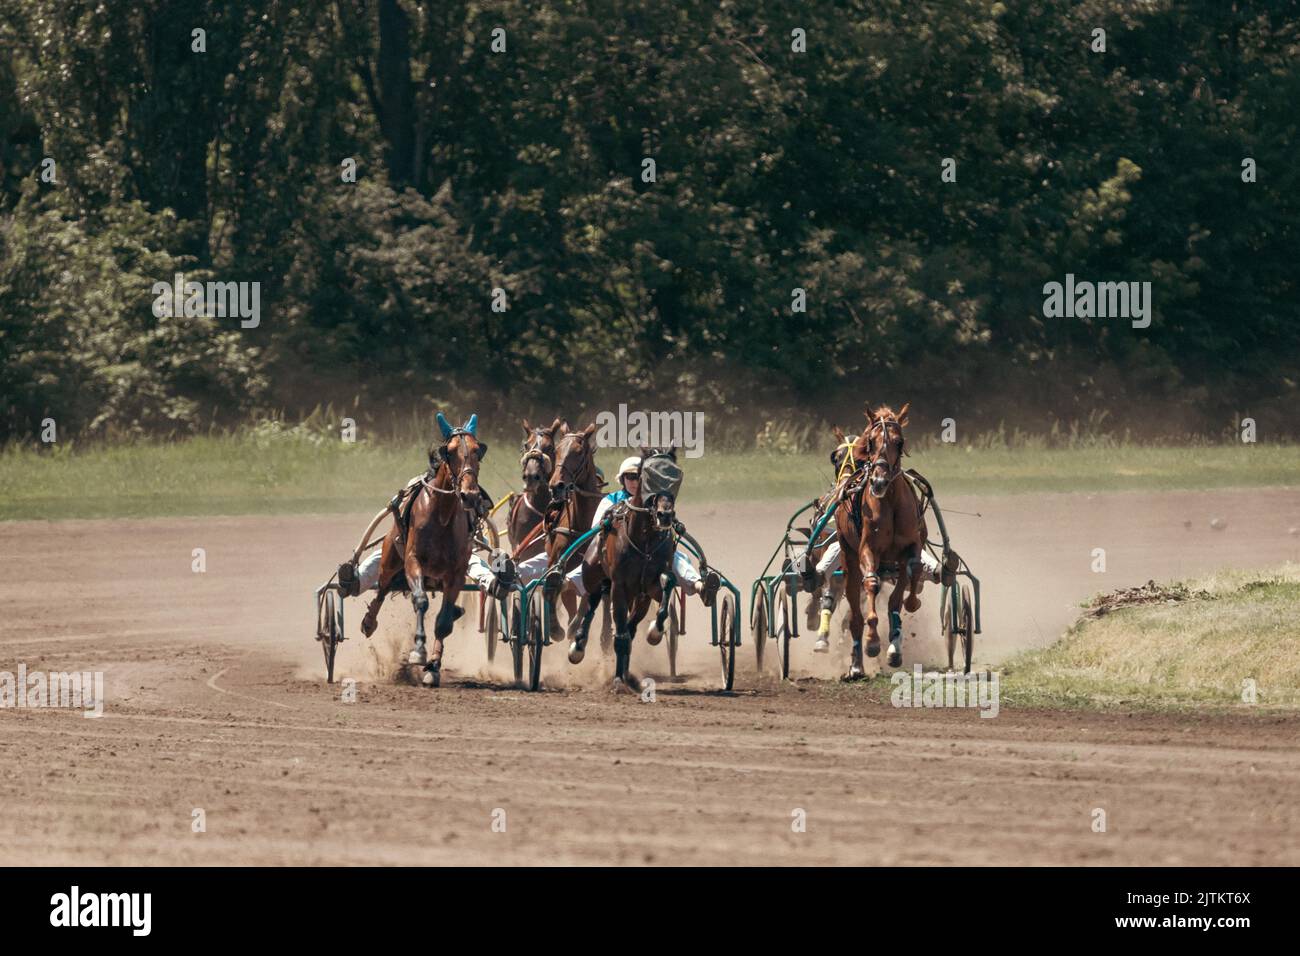 Trotters in sleds. Horse racing on the hippodrome. Graceful animals. Horse race. Equestrian sport. Betting on sports. Stock Photo